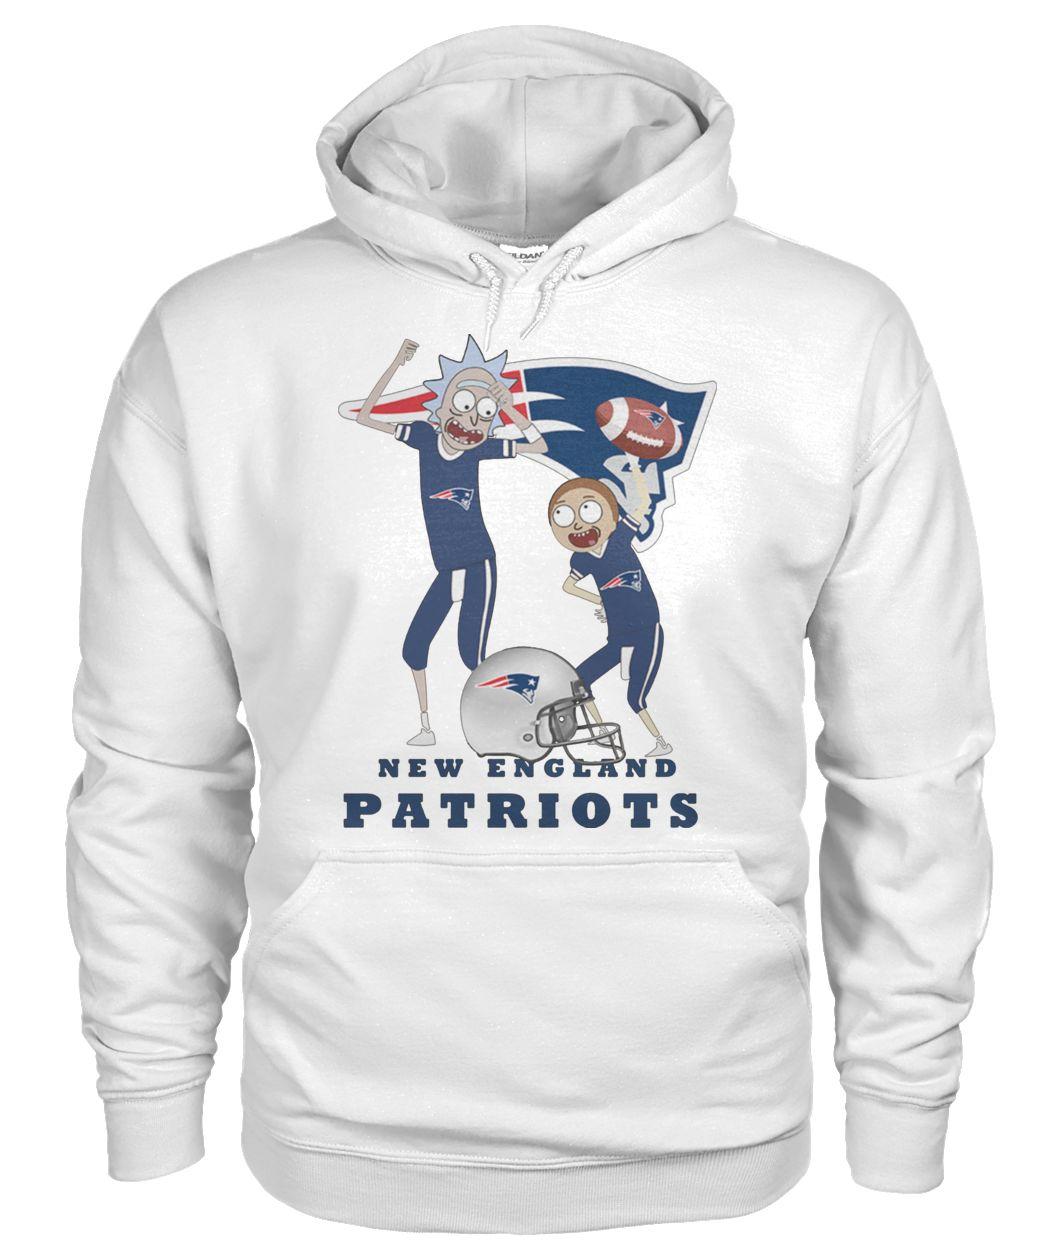 Rick and morty new england patriots hoodie